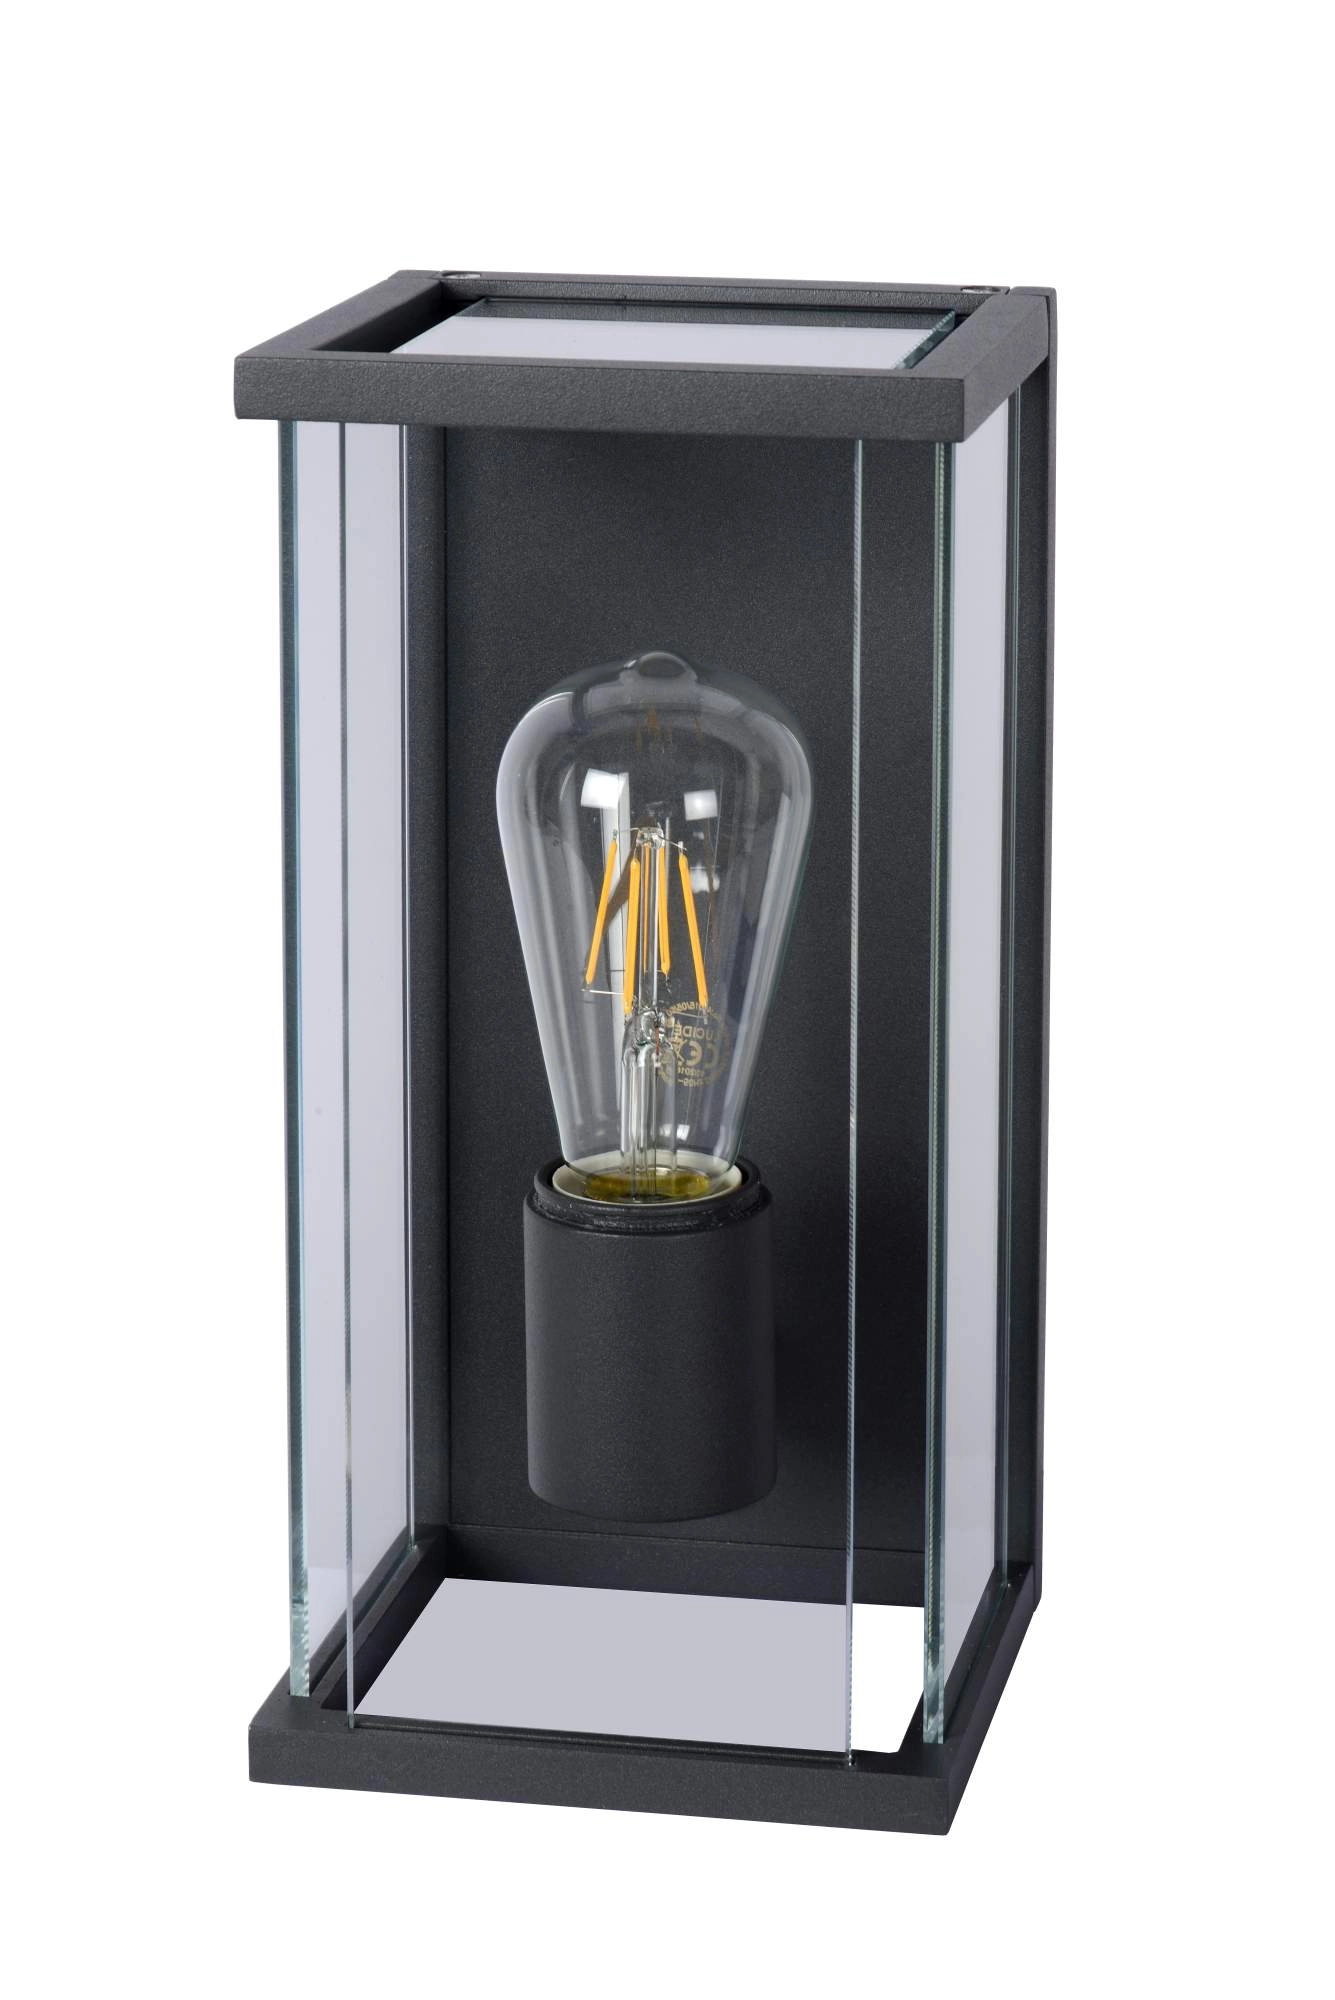 LU 27883/11/30 Lucide CLAIRE - Wall light Outdoor - 1xE27 - IP54 - Anthracite